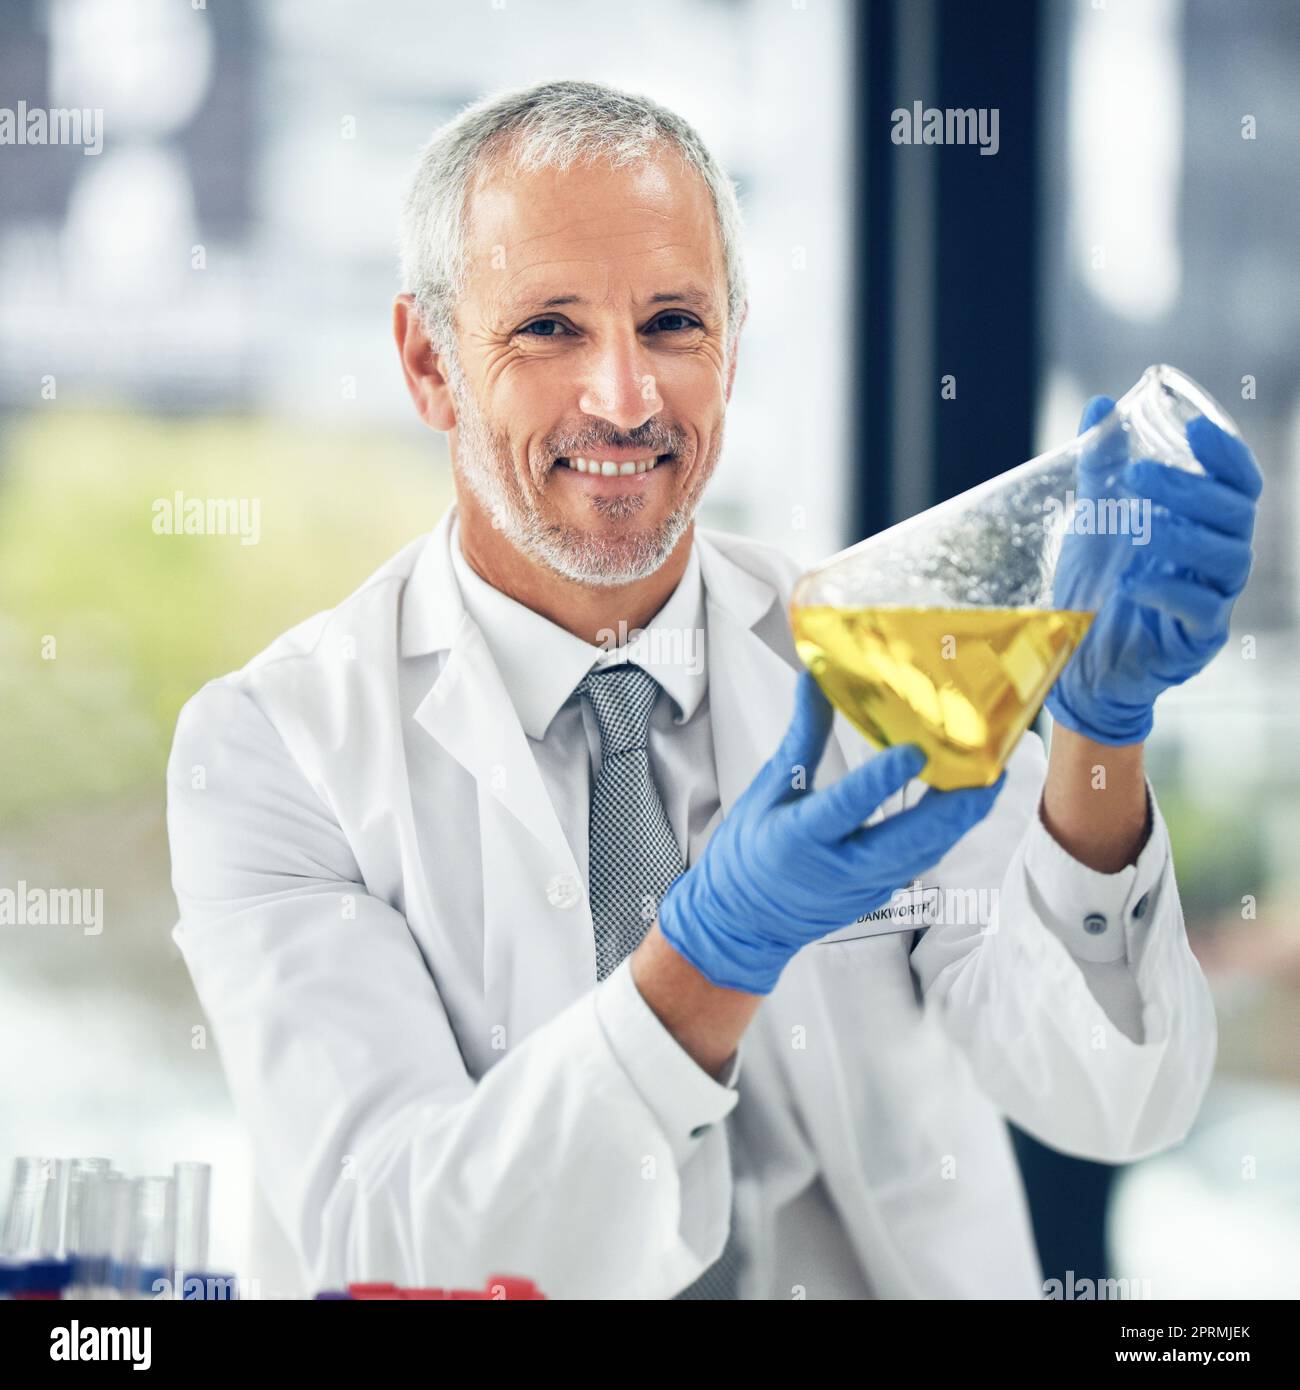 This is that cure weve all been waiting for. a scientist conducting an experiment. Stock Photo